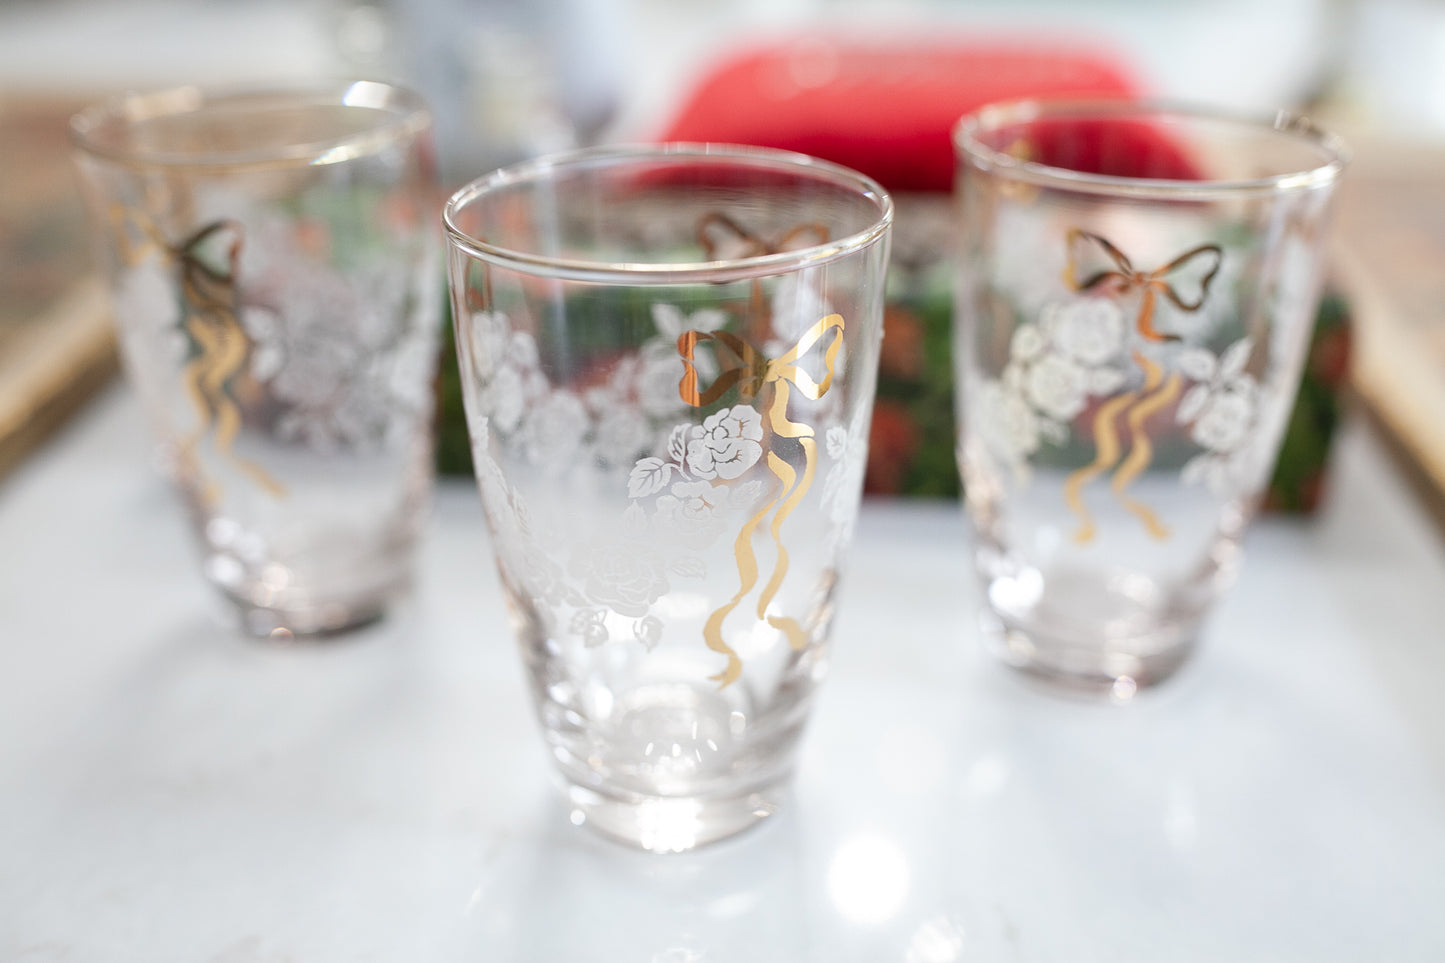 Vintage tumbler glasses called "Rose Classic" by Libbey (x3 glasses)